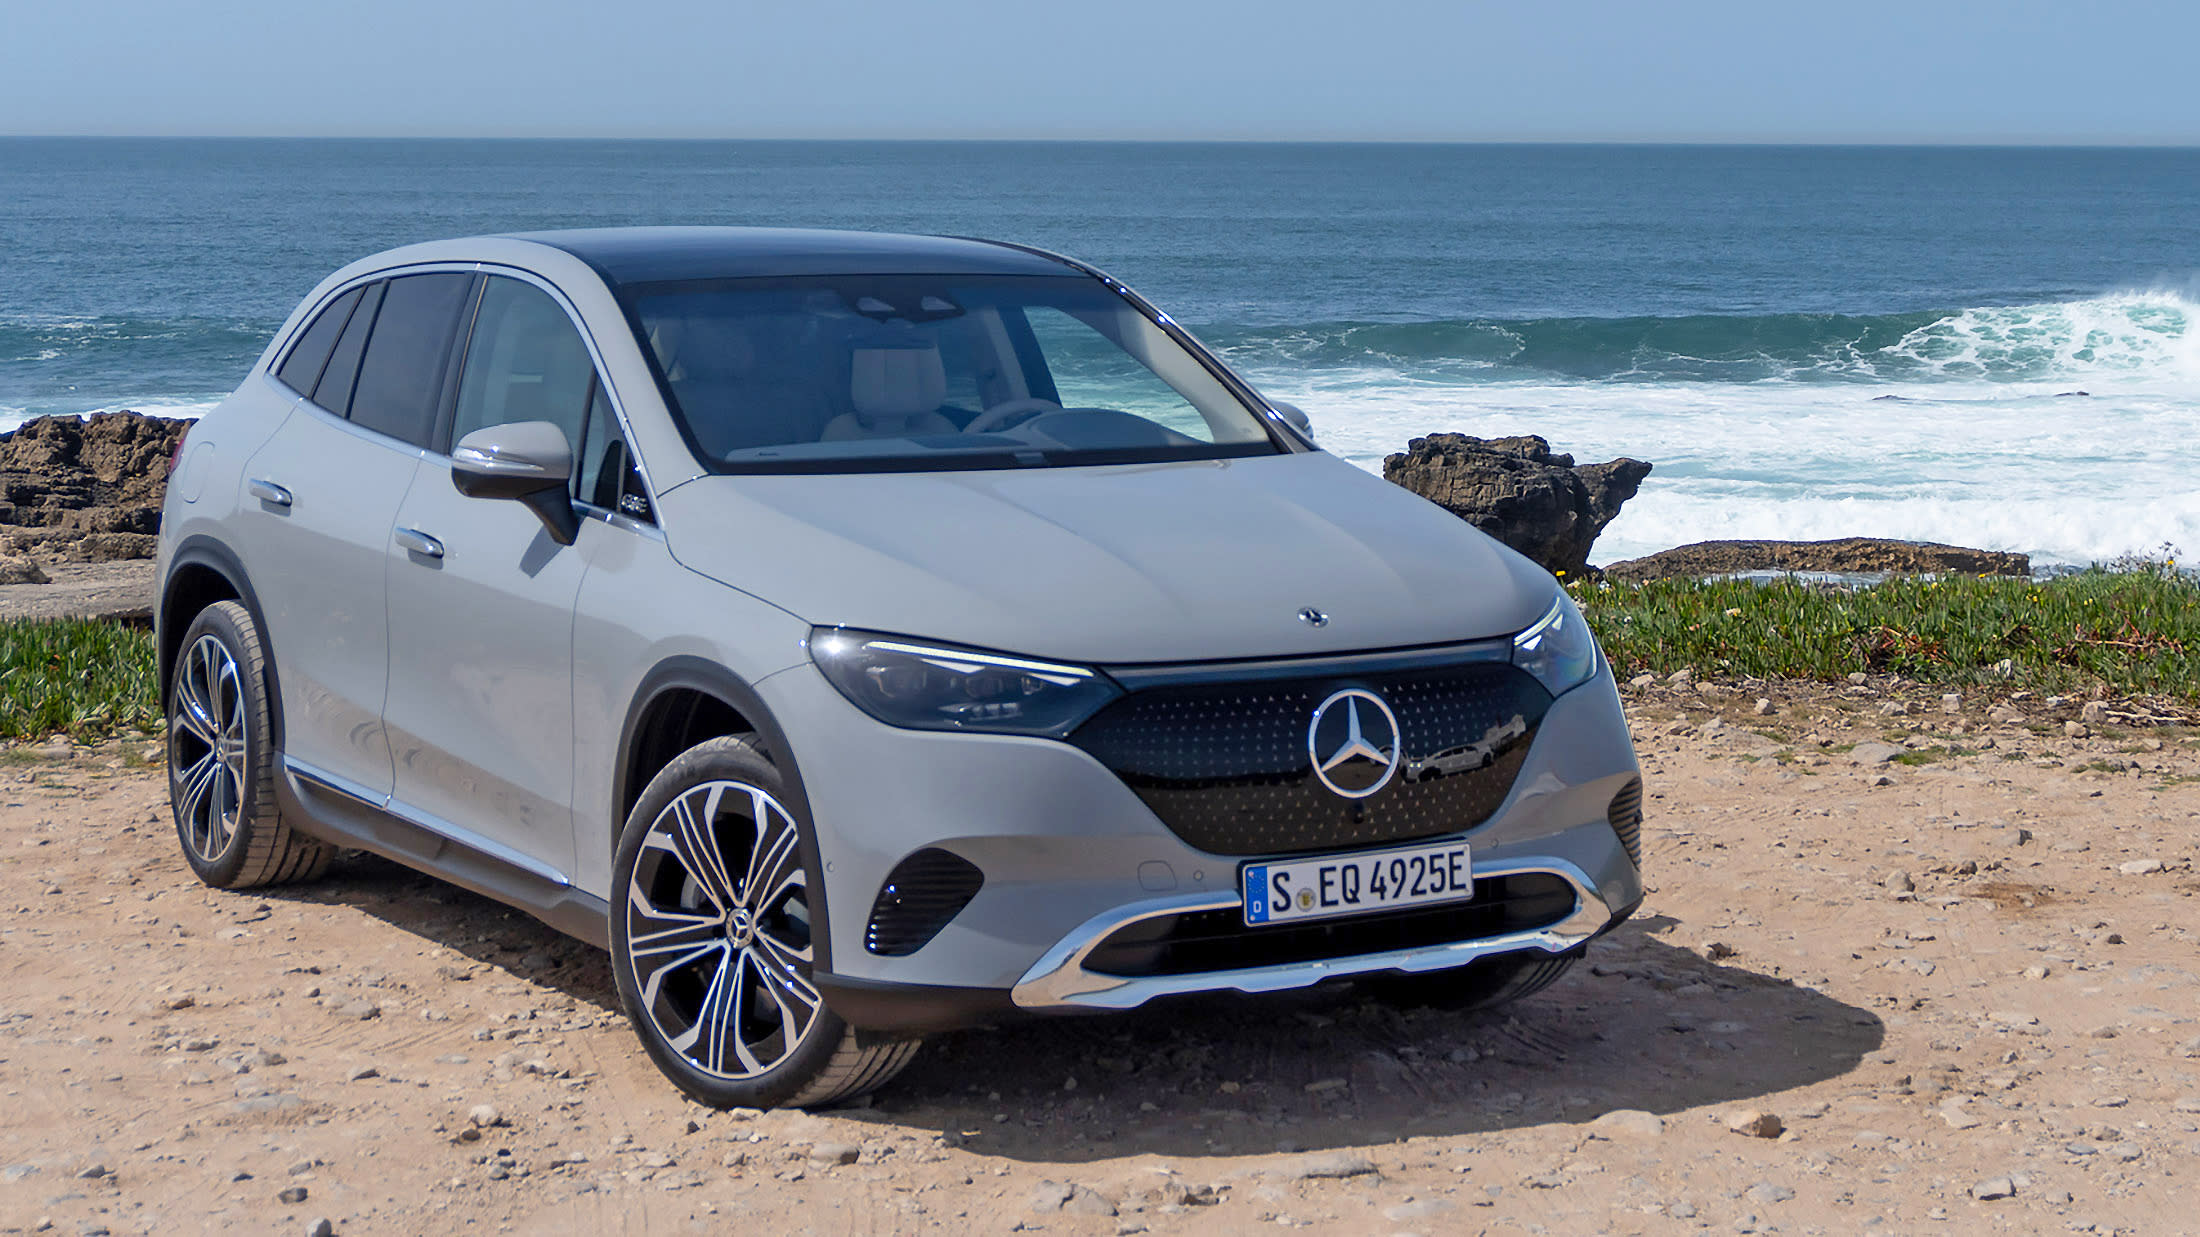 A grey Mercedes EQE SUV is parked on a rocky shore with rock outcroppings and waves close at hand in the background.